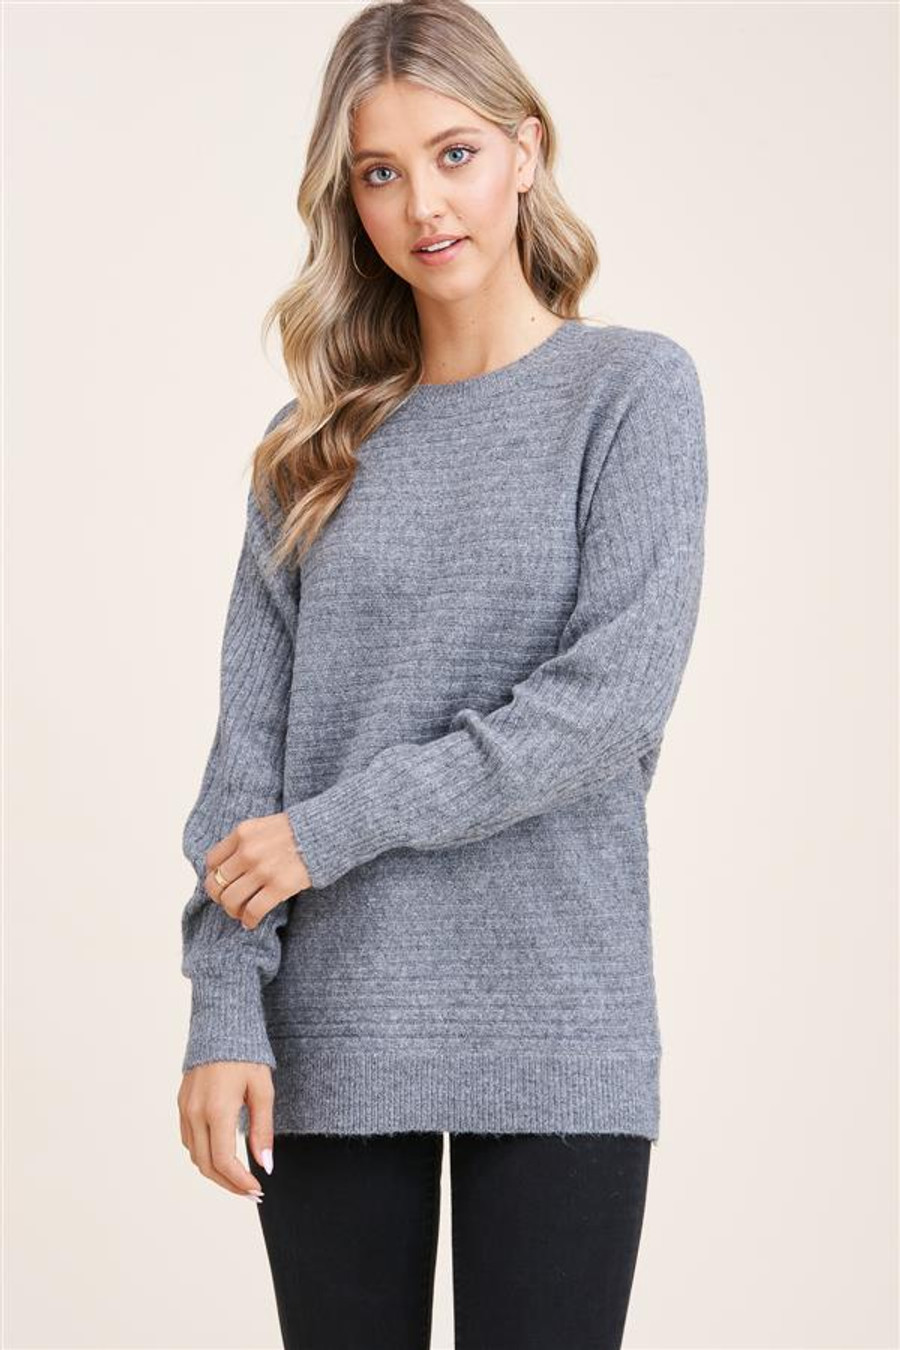 Staccato Ribbed Dolman Sleeve Sweater Cardigan - Charcoal